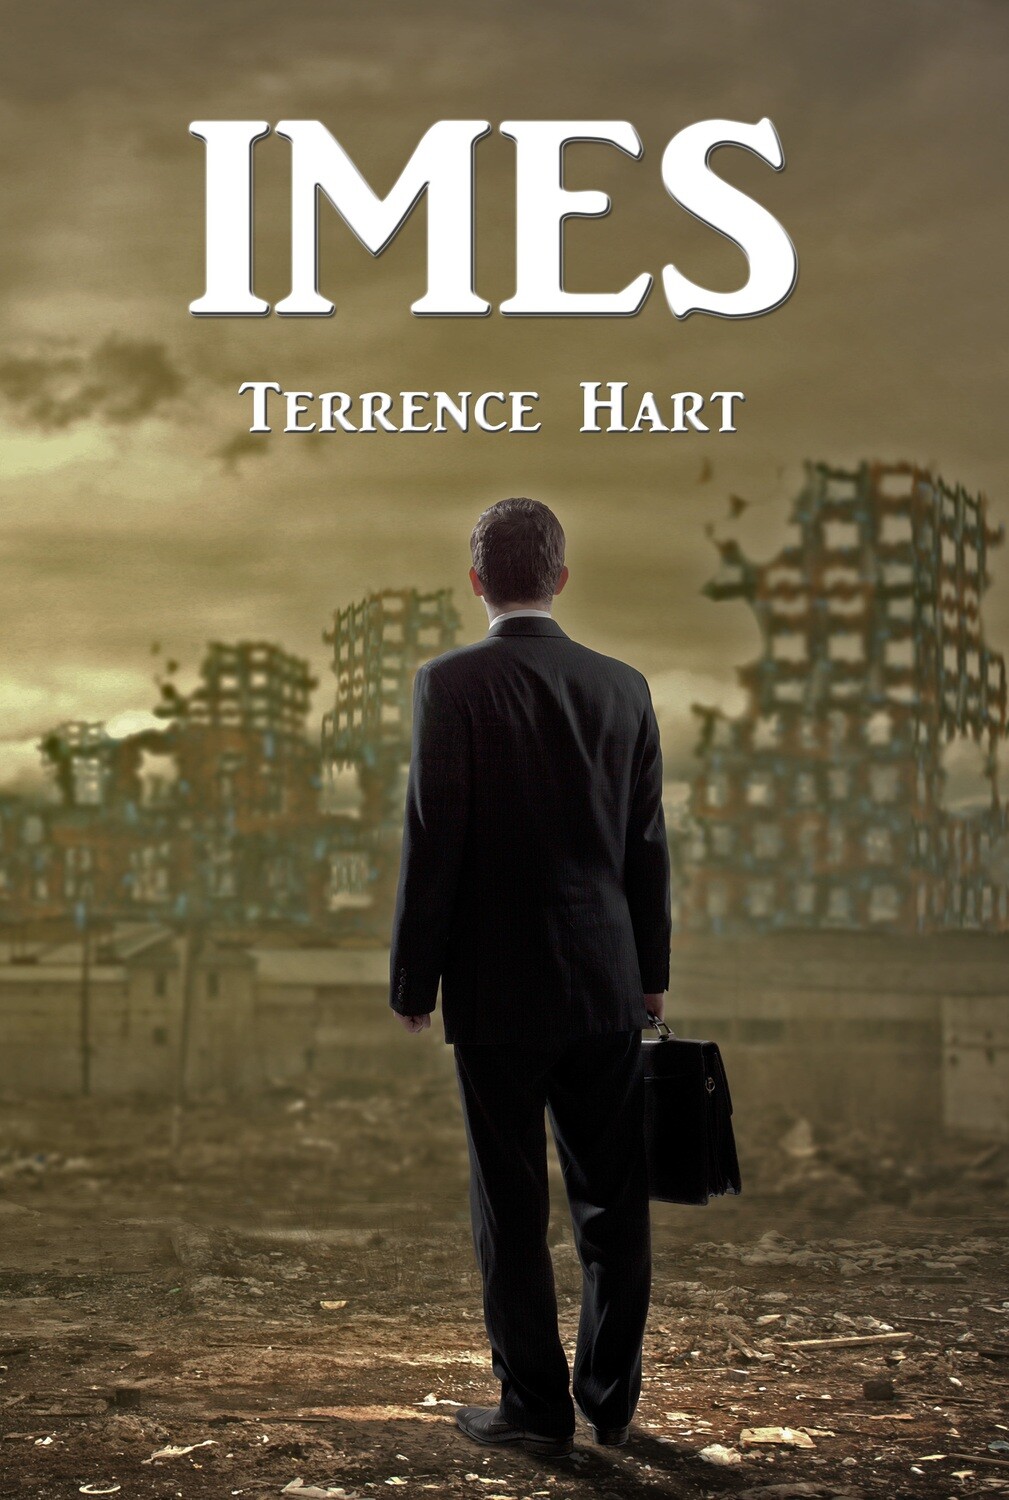 IMES - a dystopian thriller